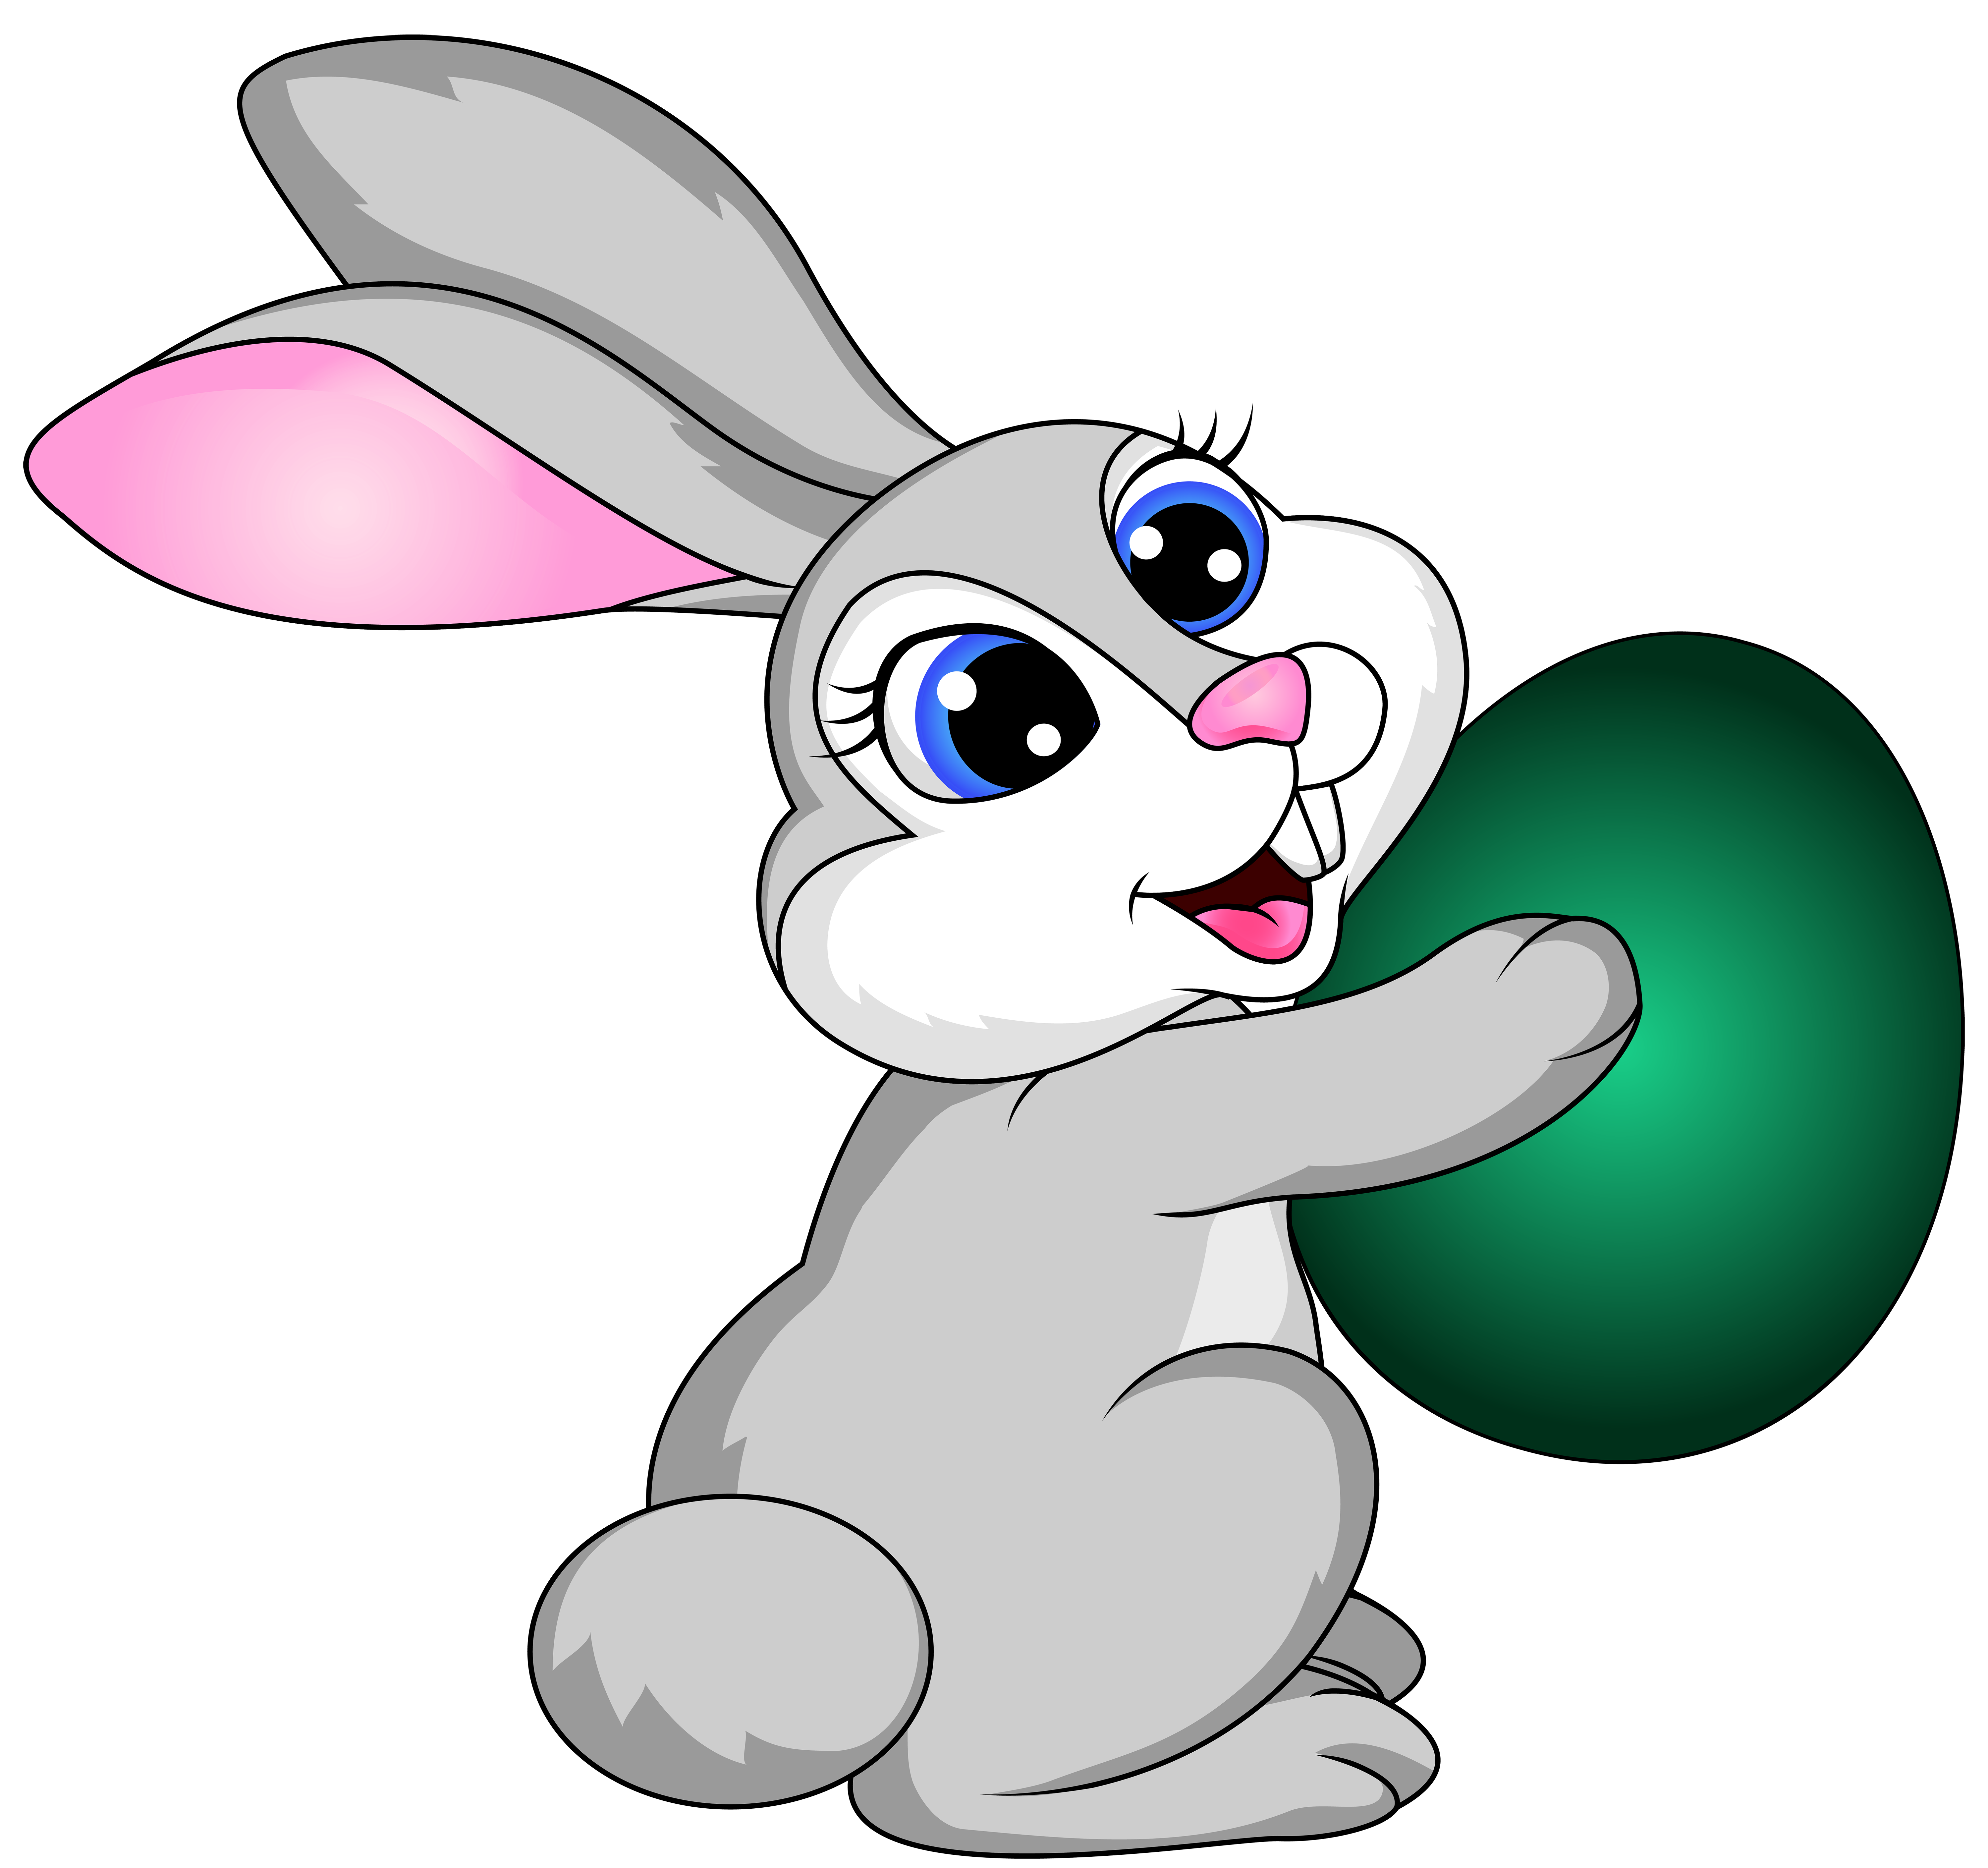 Easter bunny with egg. Slime clipart transparent background